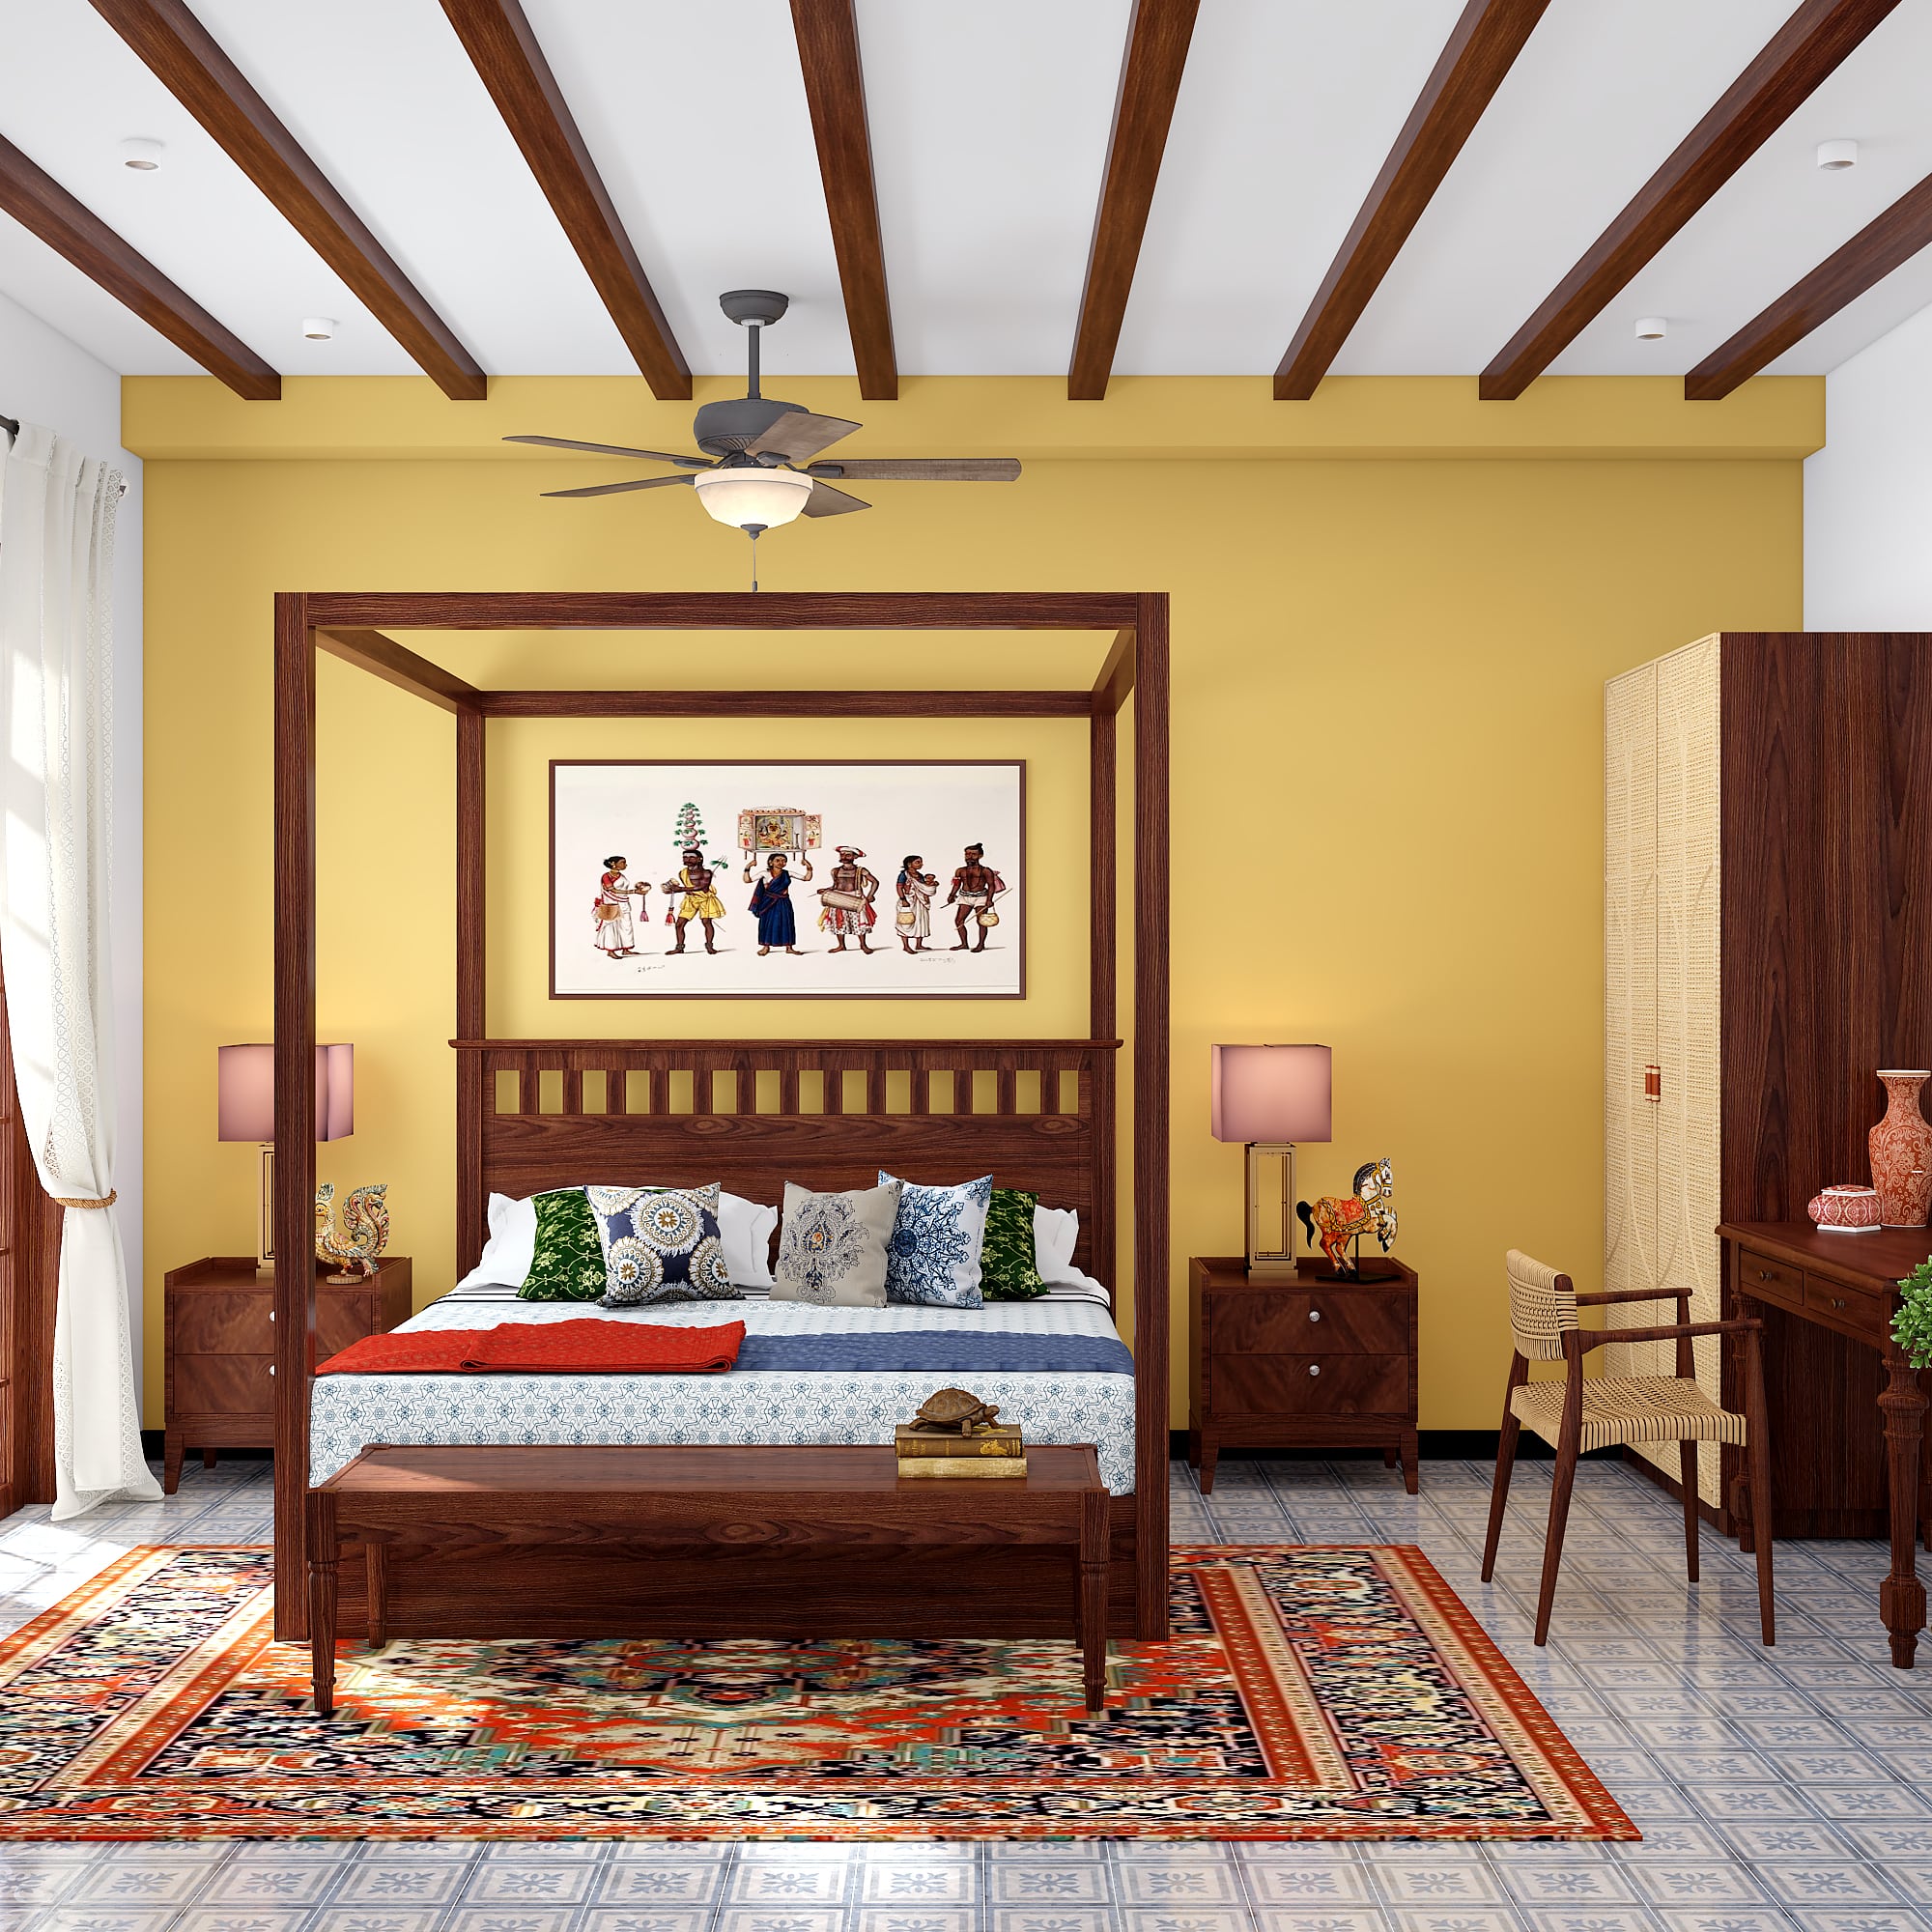 Home interior designers in Chennai designed a bedroom with a wardrobe and dressing unit